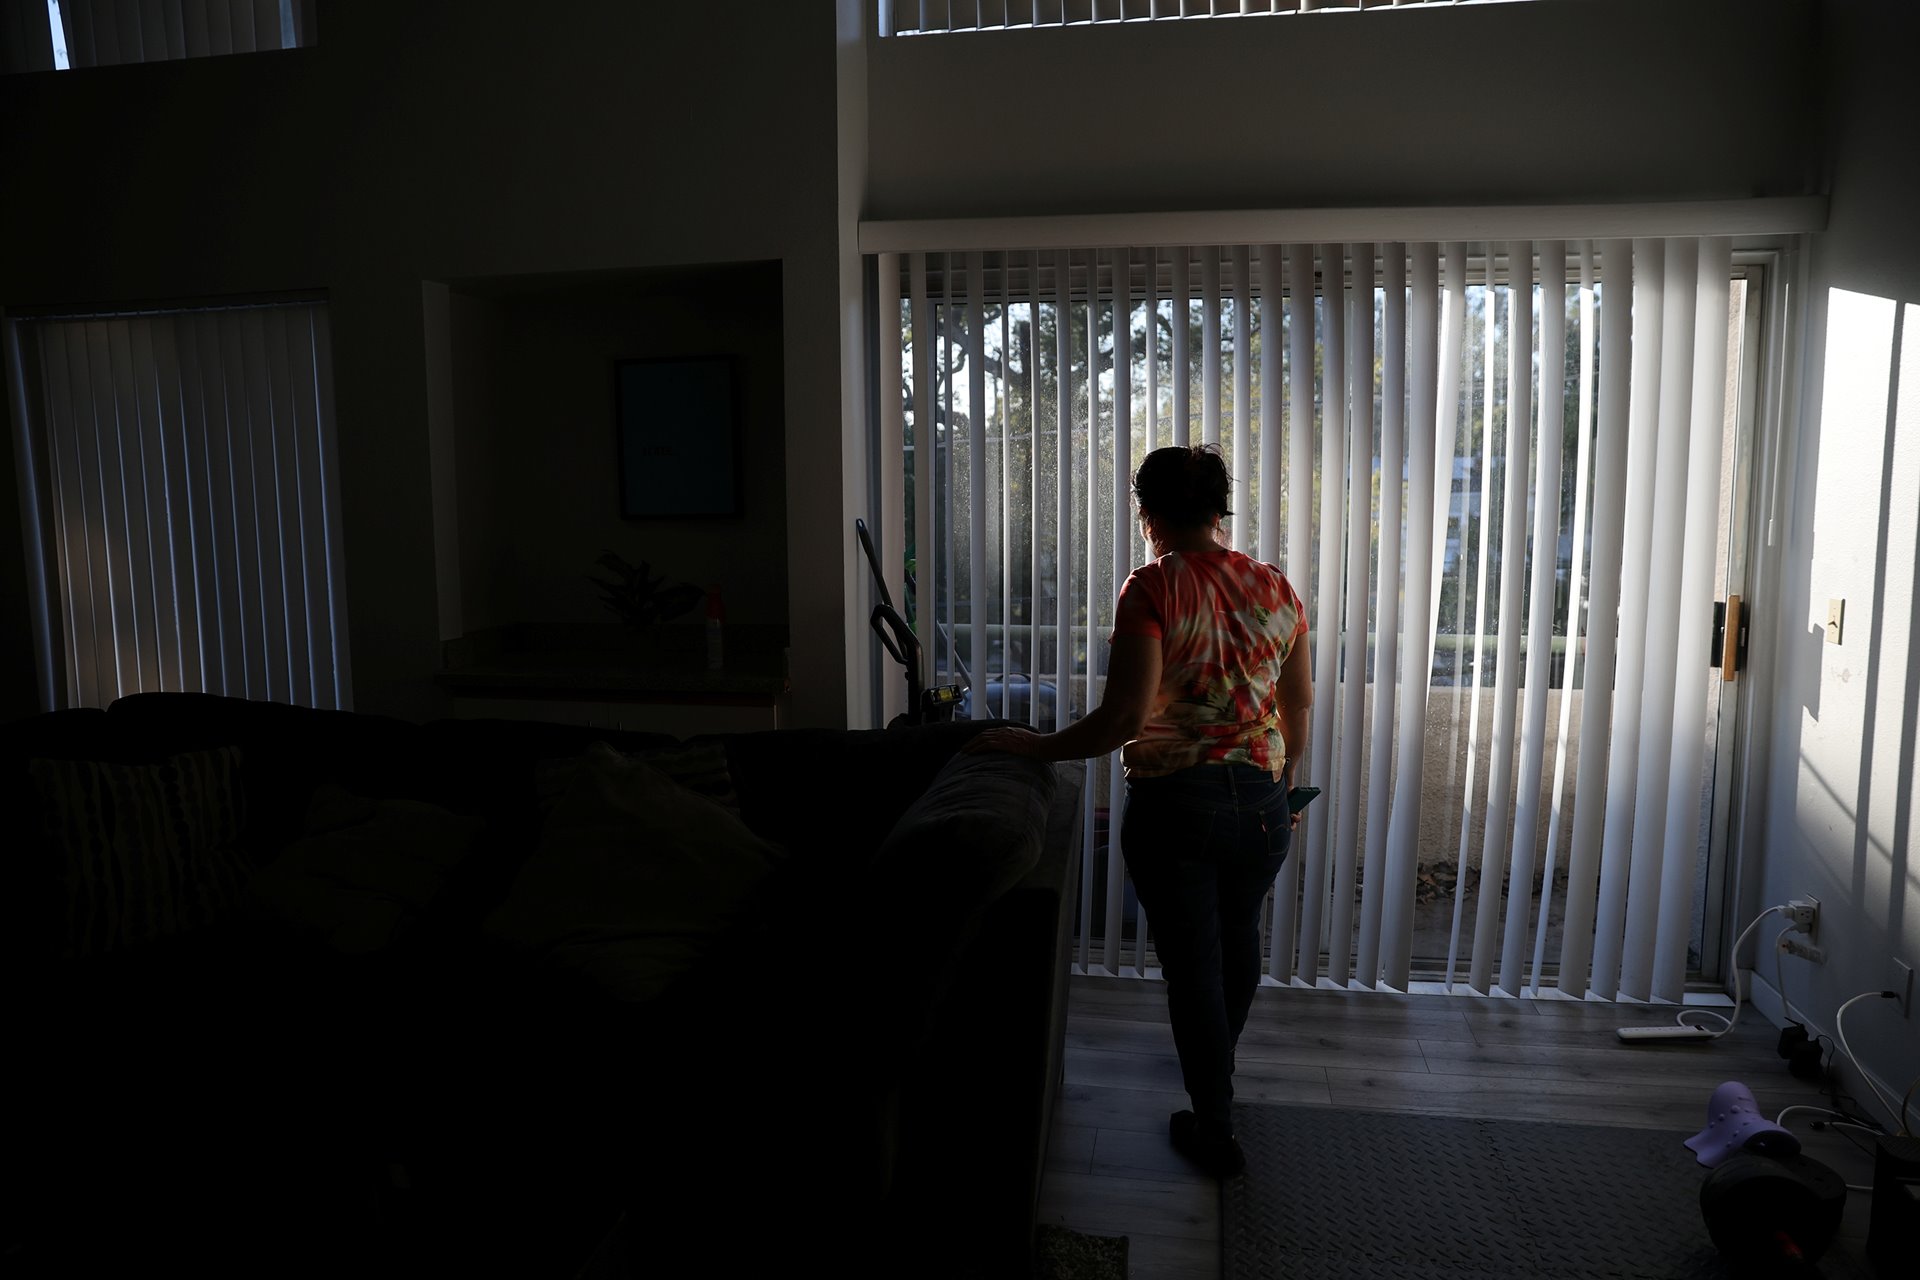 Maria Hernandez is seen in temporary accommodation in Los Angeles, California, United States, after reuniting with her daughters. The organization that helped Maria with her asylum case provided her with the apartment until her work permit arrived and she could legally begin to work.